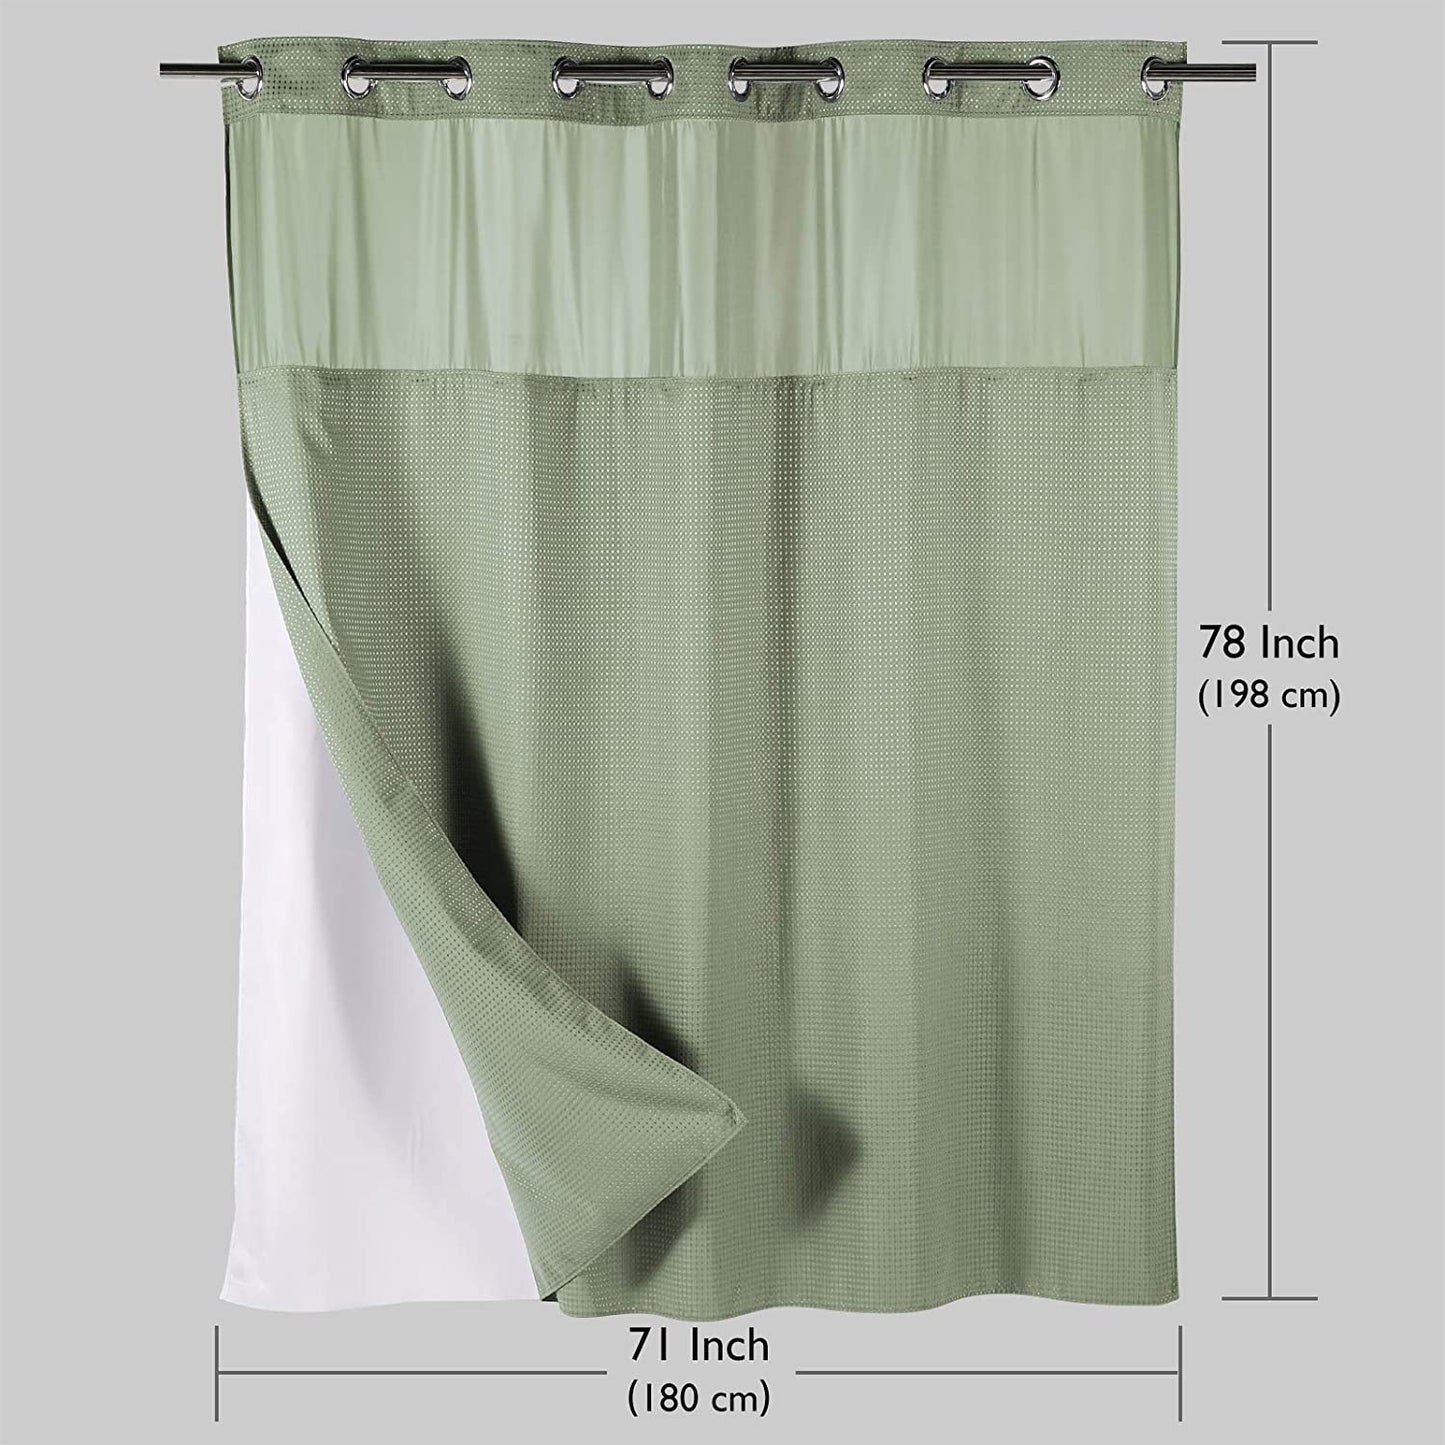 SnapHook Waffle Weave Fabric Shower Curtain with Snap-in Liner | 71WX78L, Sage Green